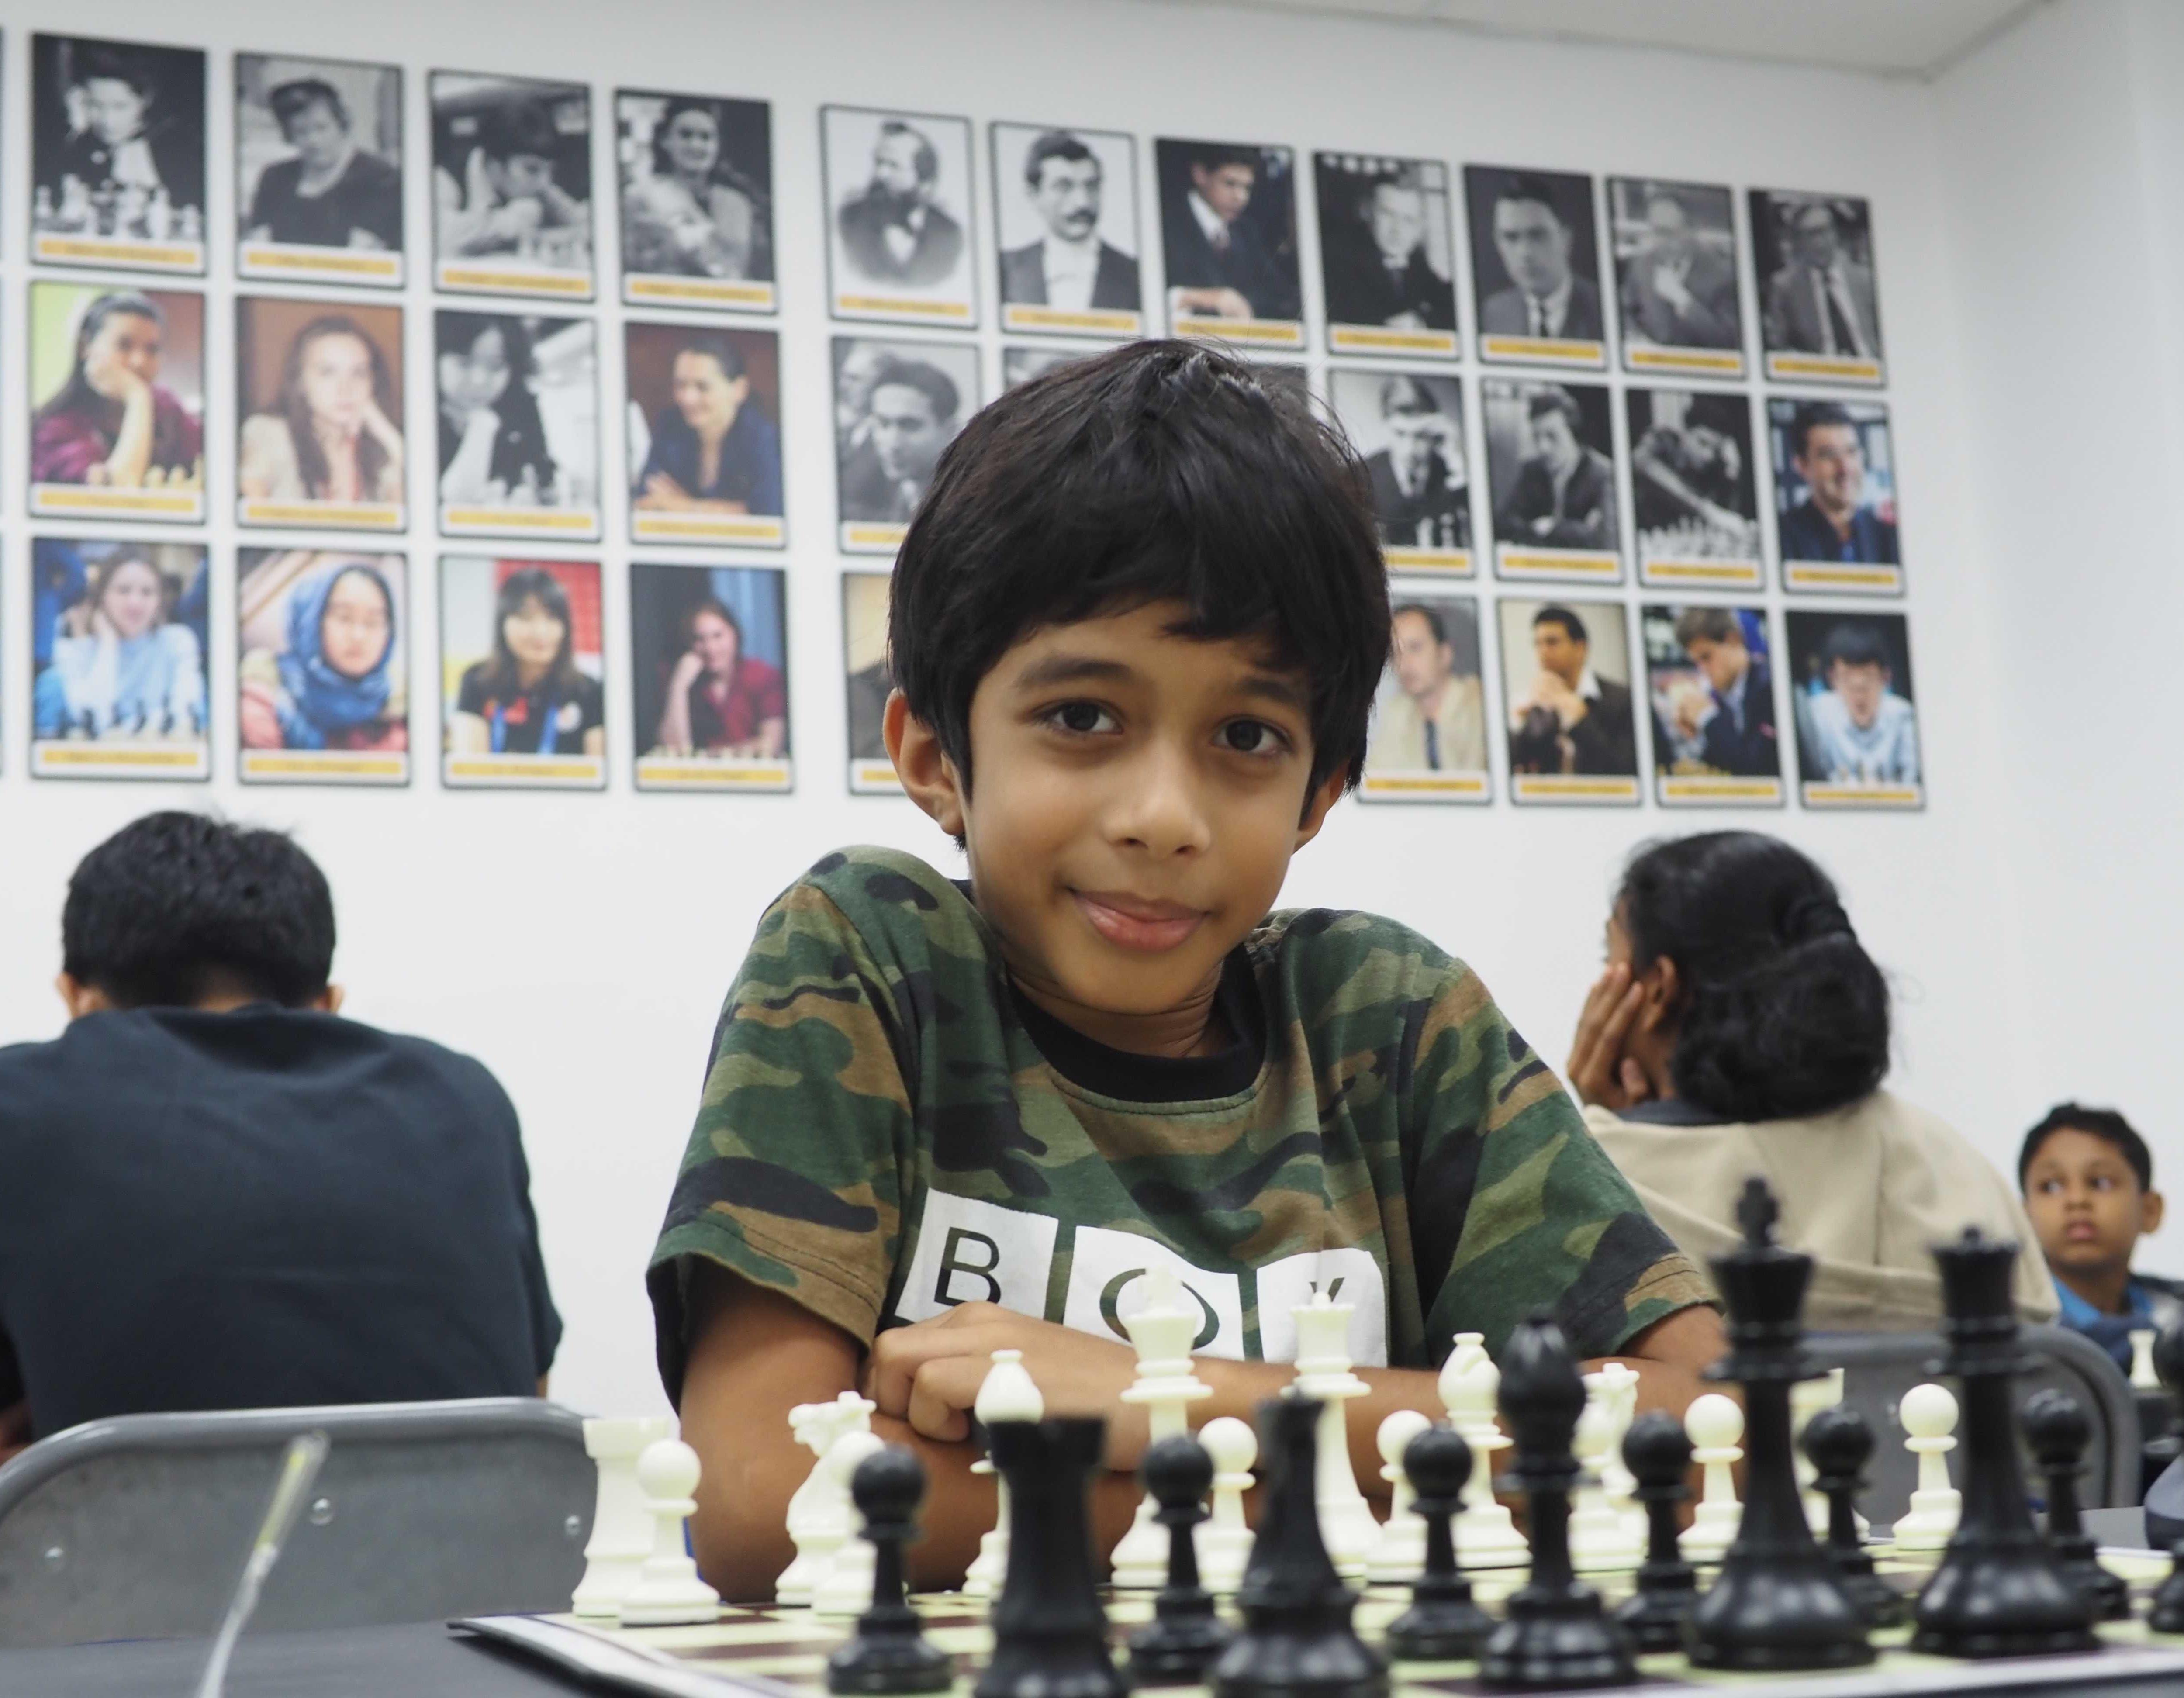 How to Defeat Kids in Chess Tournaments